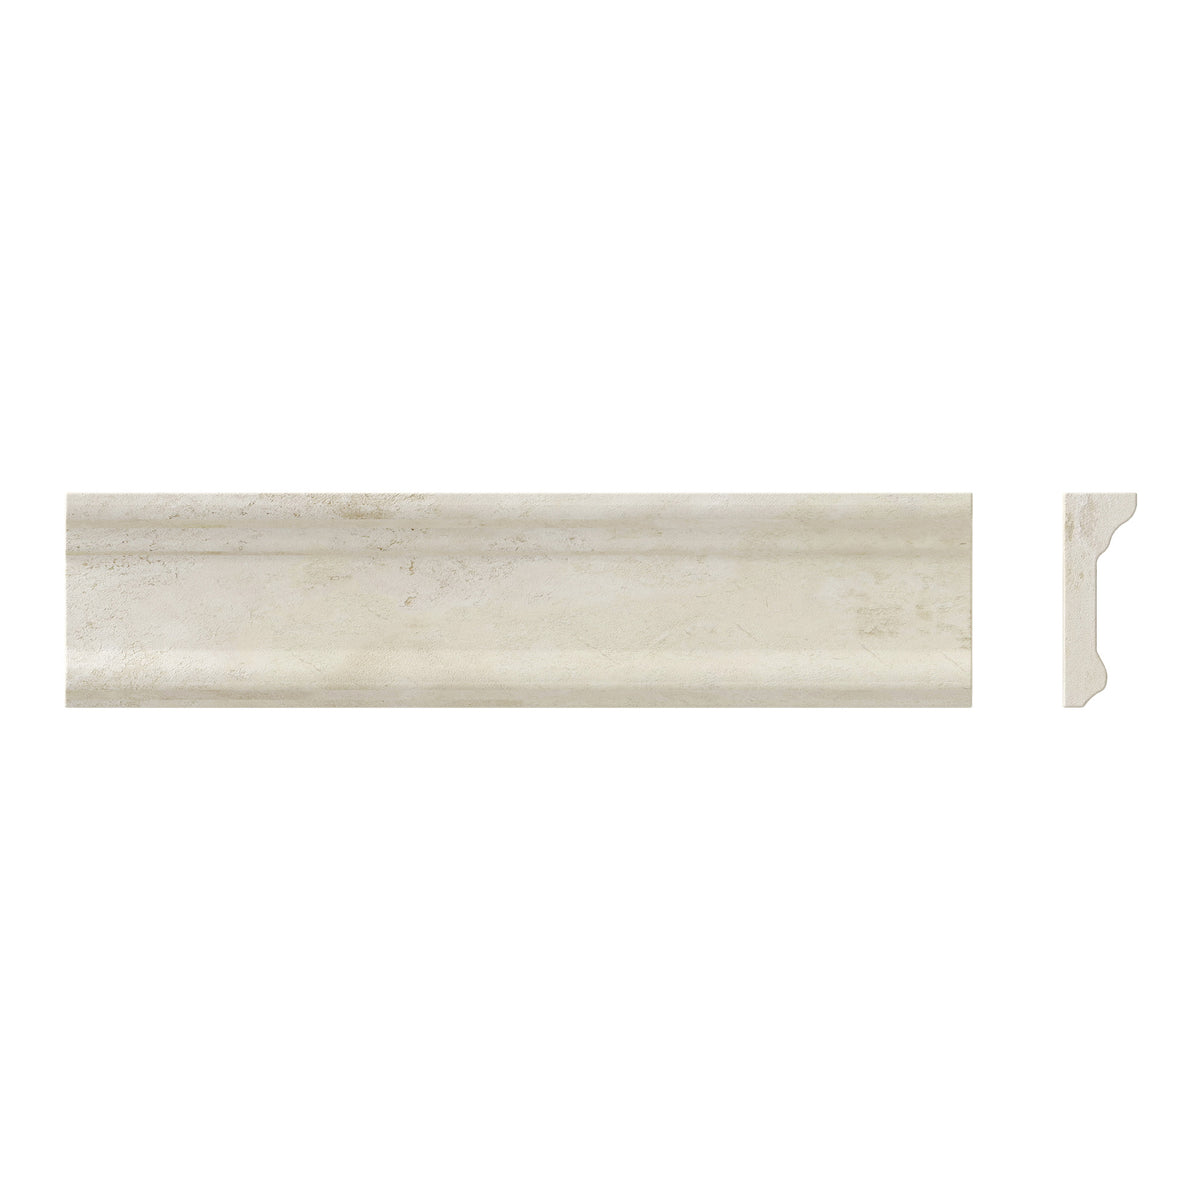 Mediterranean Family Panel Moulding Main Product Slider View